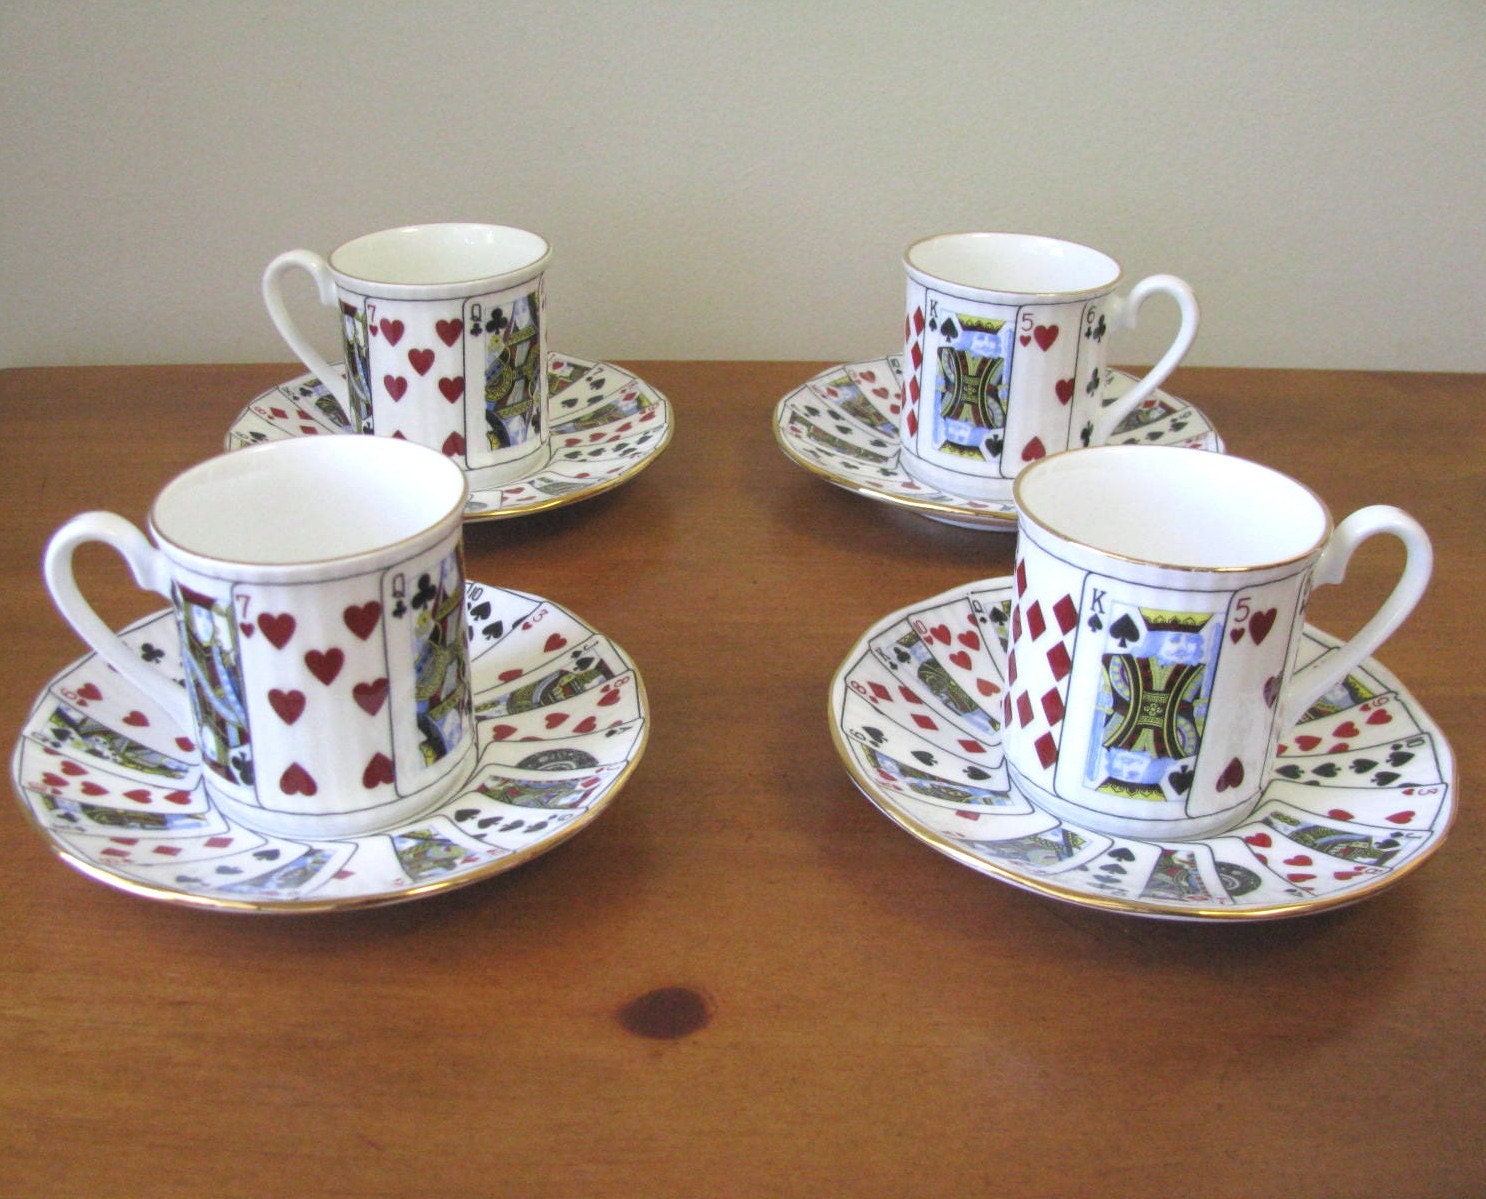 Vintage Staffordshire Playing Card Demitasse Cups - Set of 4